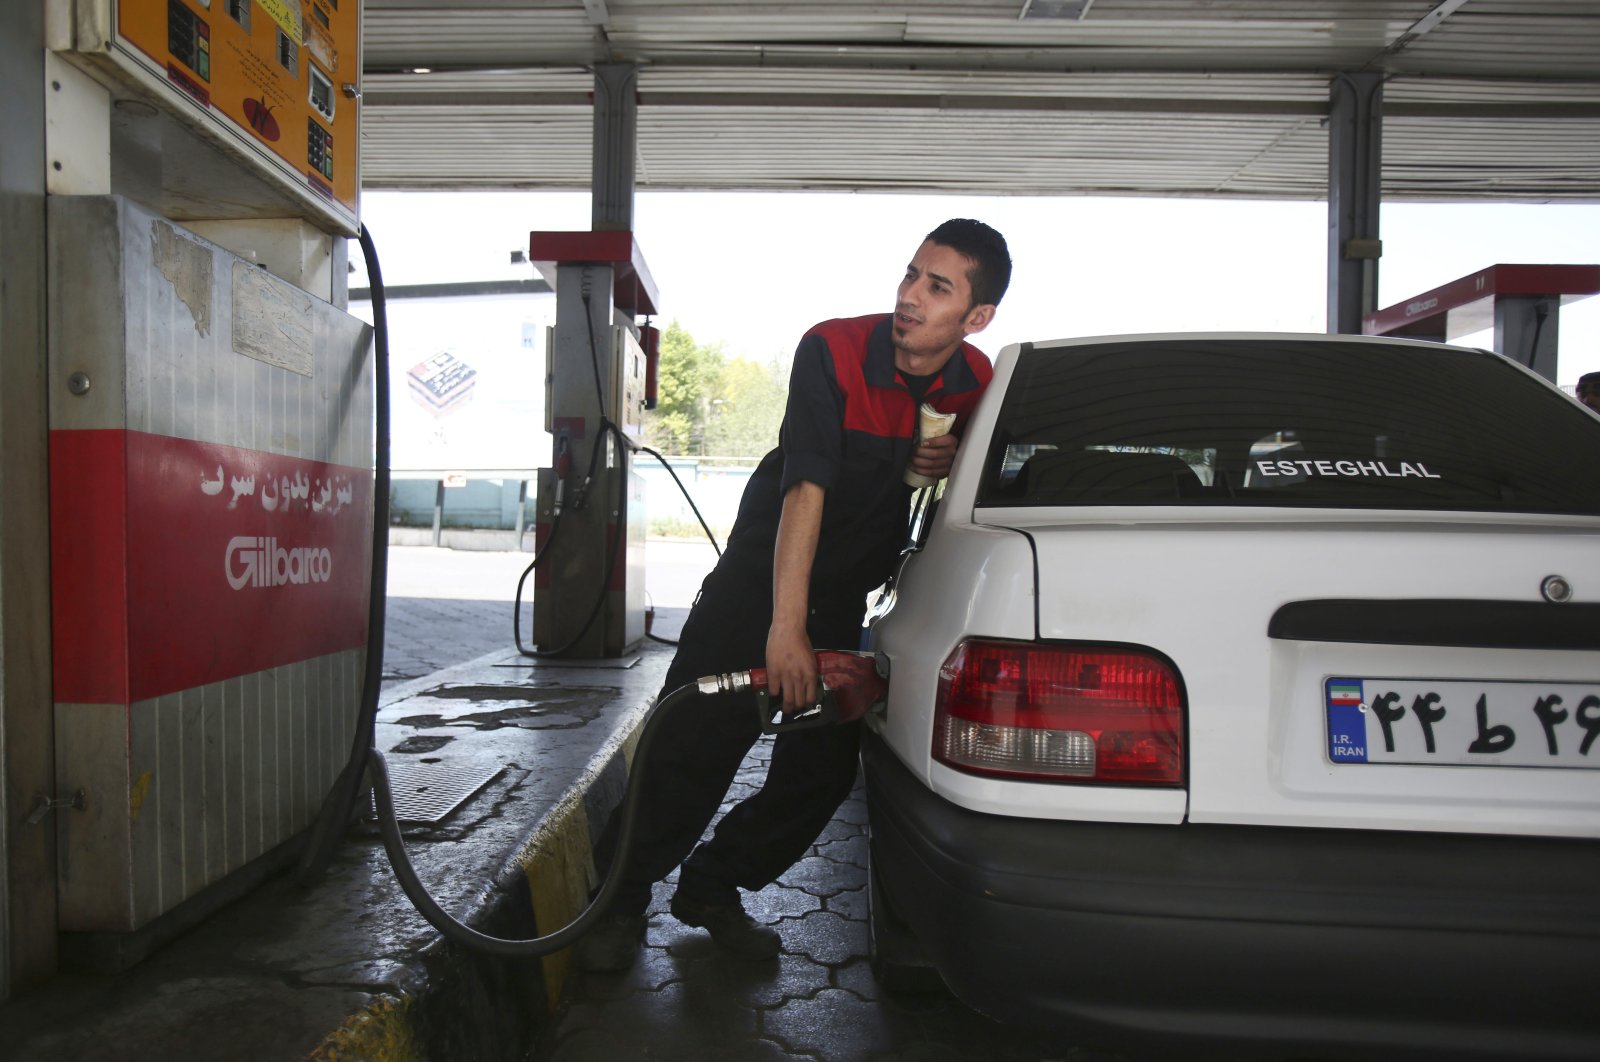 A gas station worker fills a car in central Tehran, Iran, Friday, April 25, 2014. (AP Photo)